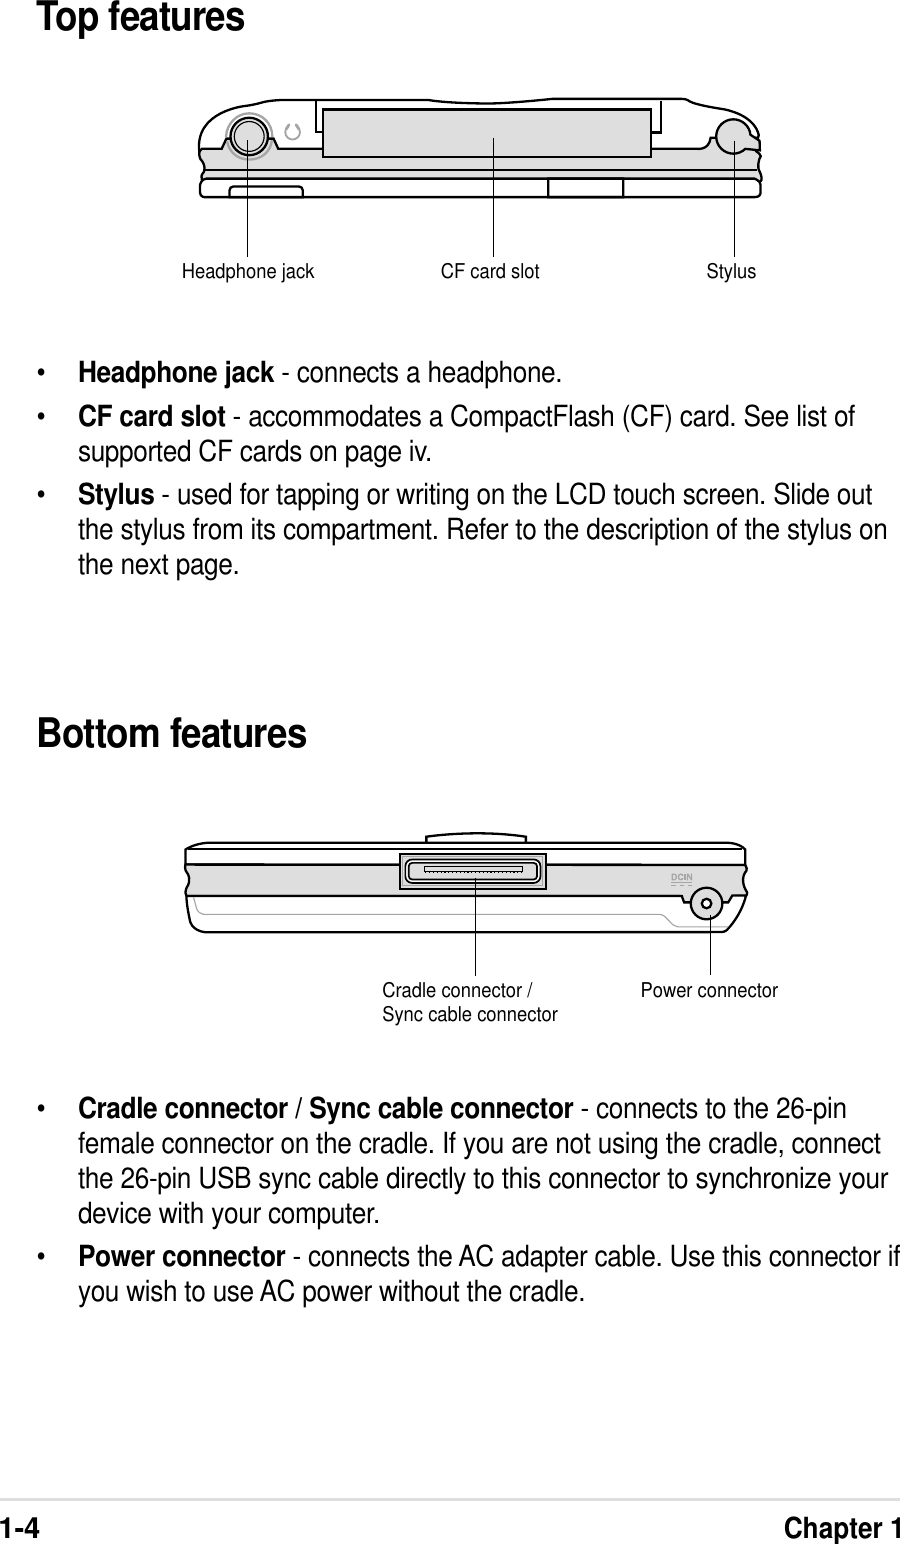 1-4Chapter 1Top featuresBottom features•Headphone jack - connects a headphone.•CF card slot - accommodates a CompactFlash (CF) card. See list ofsupported CF cards on page iv.•Stylus - used for tapping or writing on the LCD touch screen. Slide outthe stylus from its compartment. Refer to the description of the stylus onthe next page.•Cradle connector / Sync cable connector - connects to the 26-pinfemale connector on the cradle. If you are not using the cradle, connectthe 26-pin USB sync cable directly to this connector to synchronize yourdevice with your computer.•Power connector - connects the AC adapter cable. Use this connector ifyou wish to use AC power without the cradle.Cradle connector /Sync cable connector Power connectorStylusCF card slotHeadphone jack